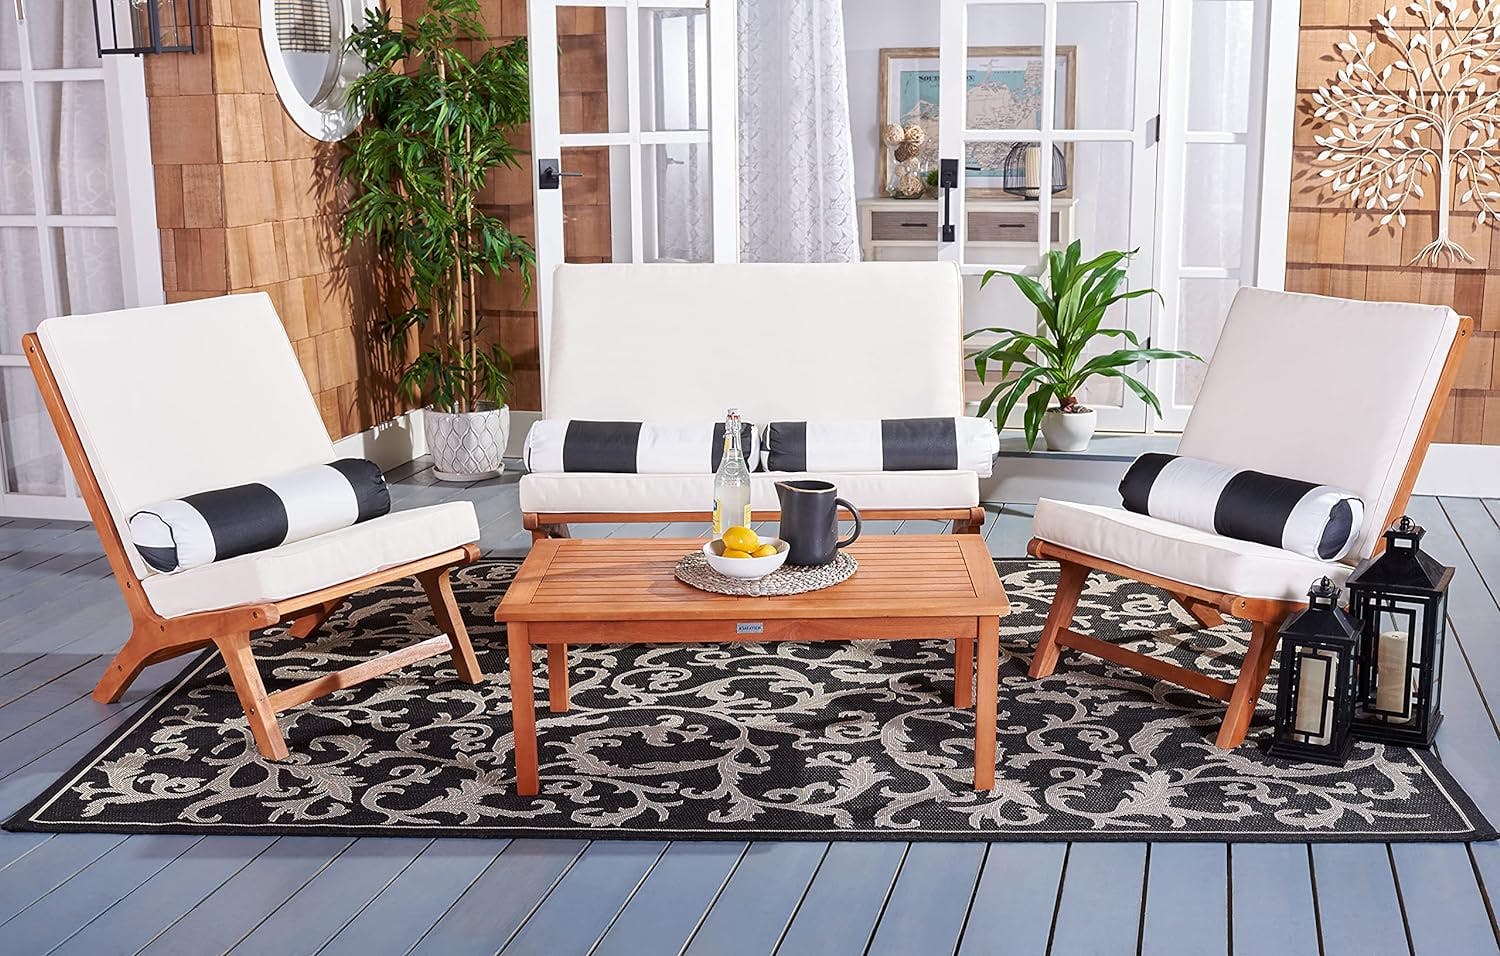 Sao Paulo Inspired 4-Piece Outdoor Living Set with Black & White Accent Pillows